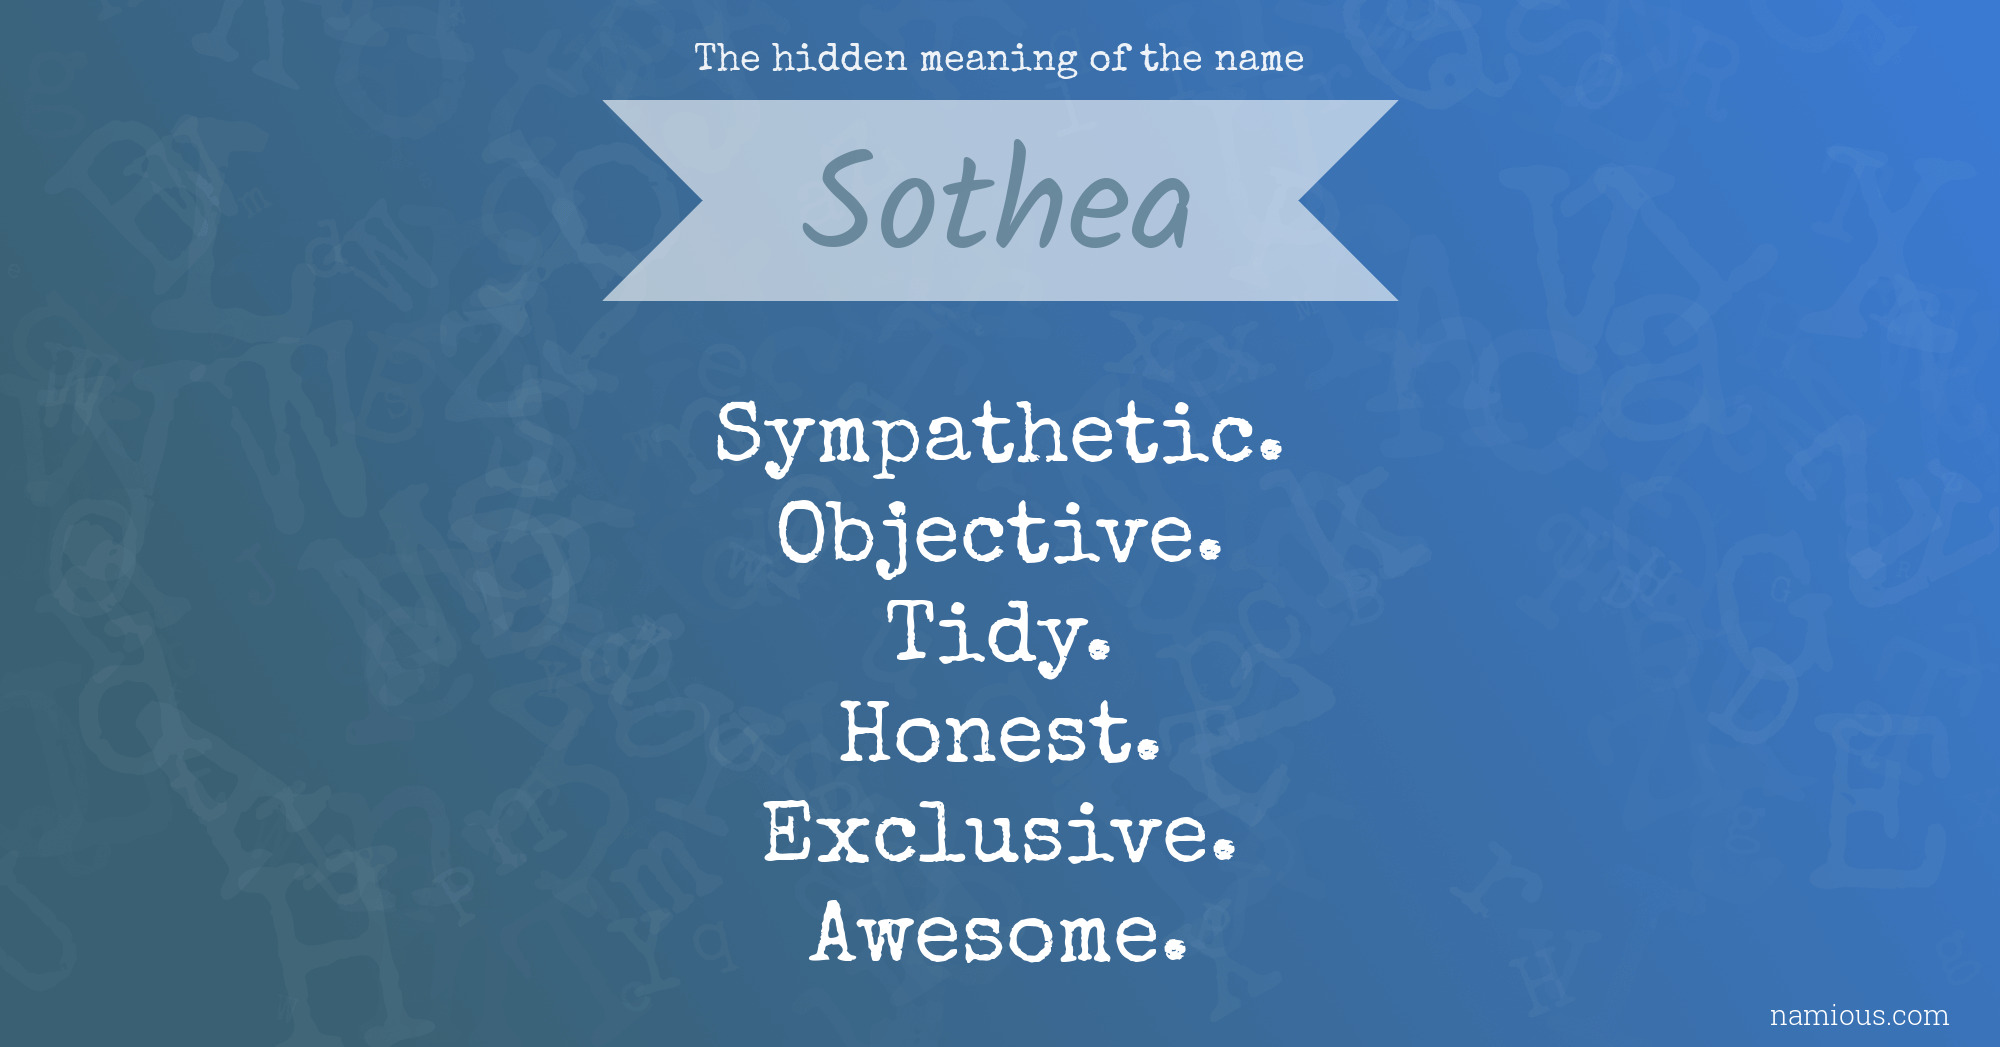 The hidden meaning of the name Sothea